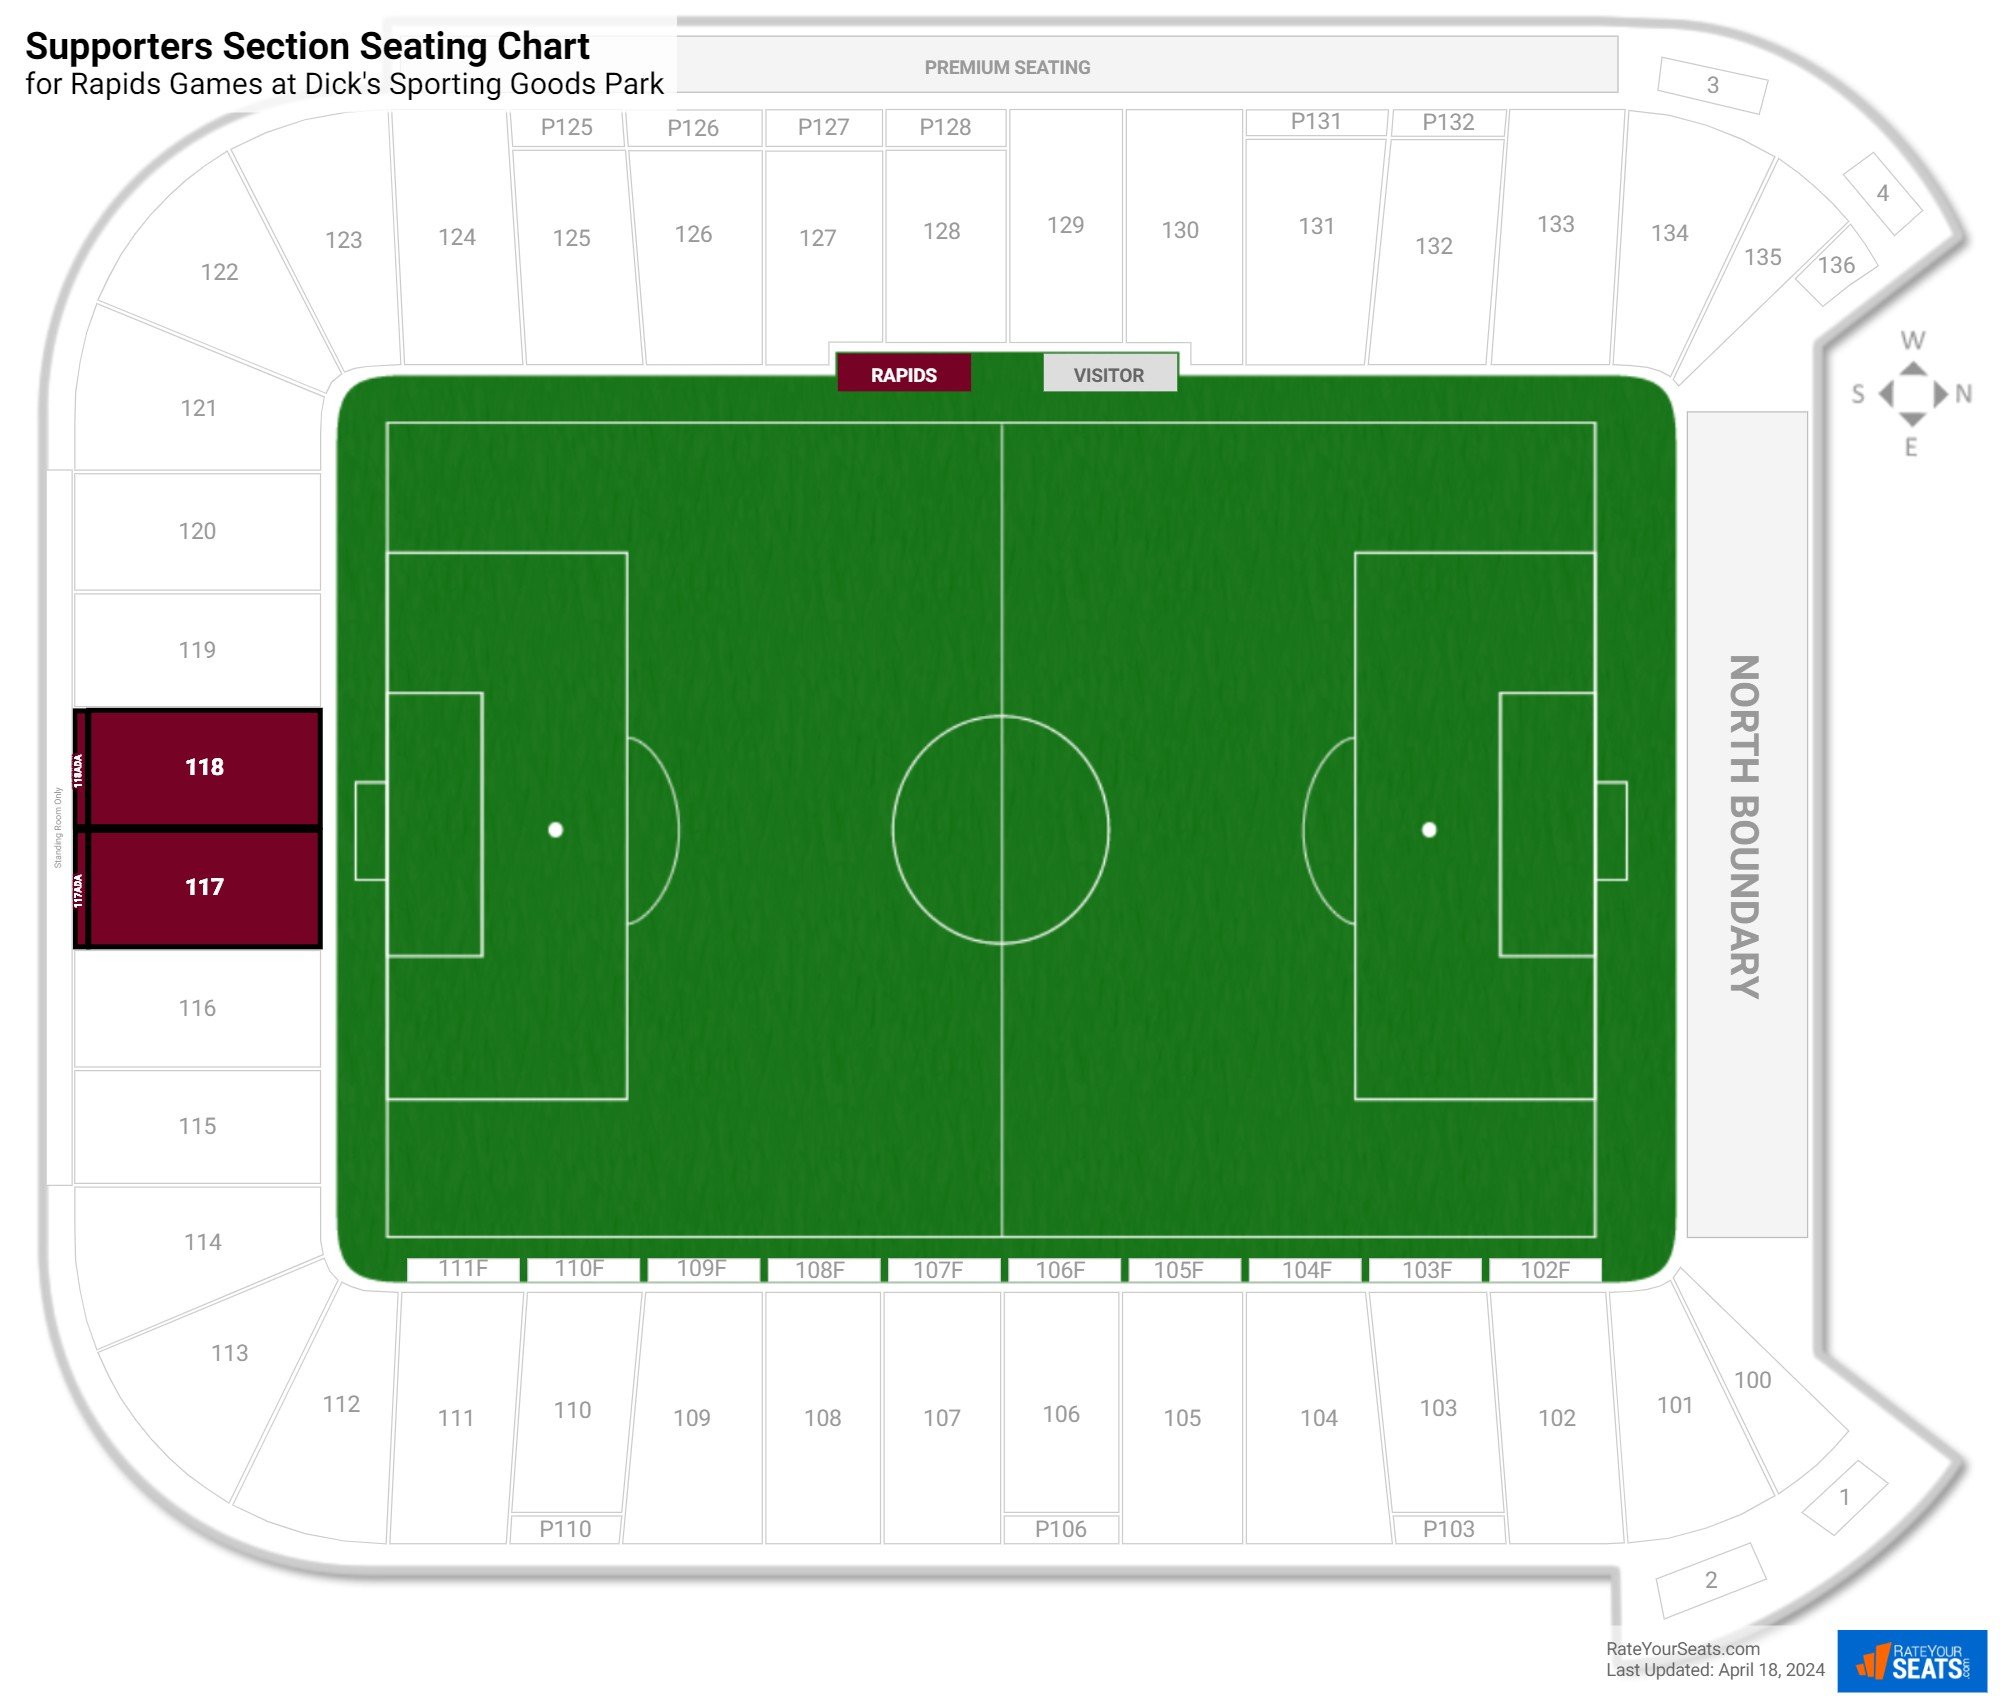 Rapids Supporters Section Seating Chart at Dick